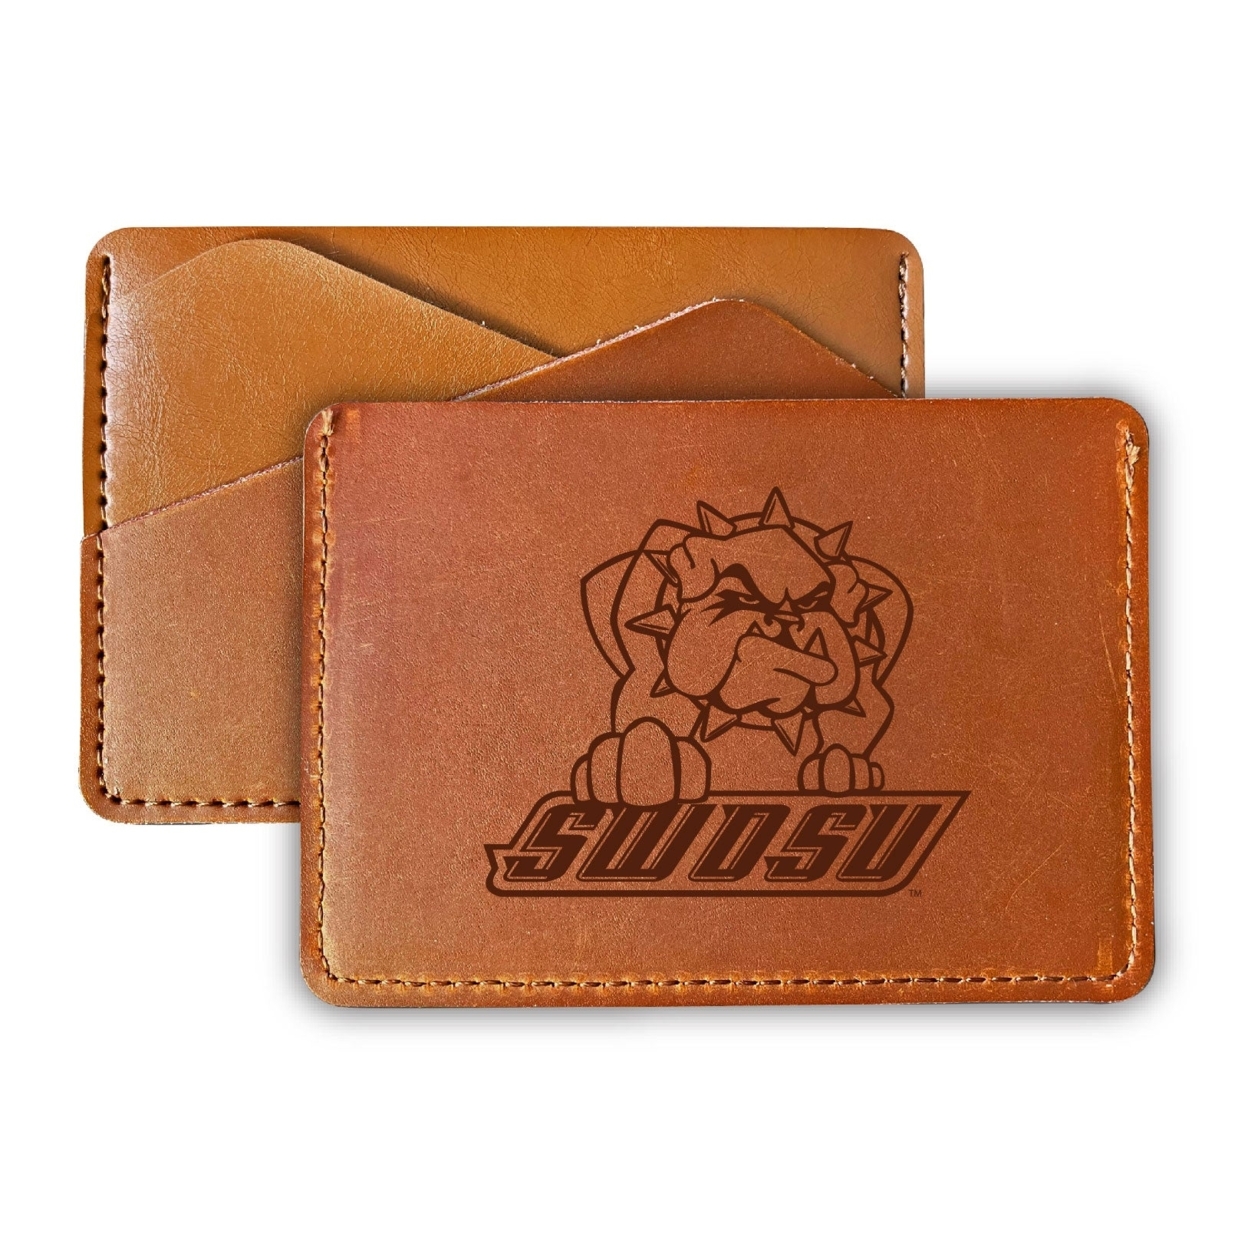 Southwestern Oklahoma State University College Leather Card Holder Wallet